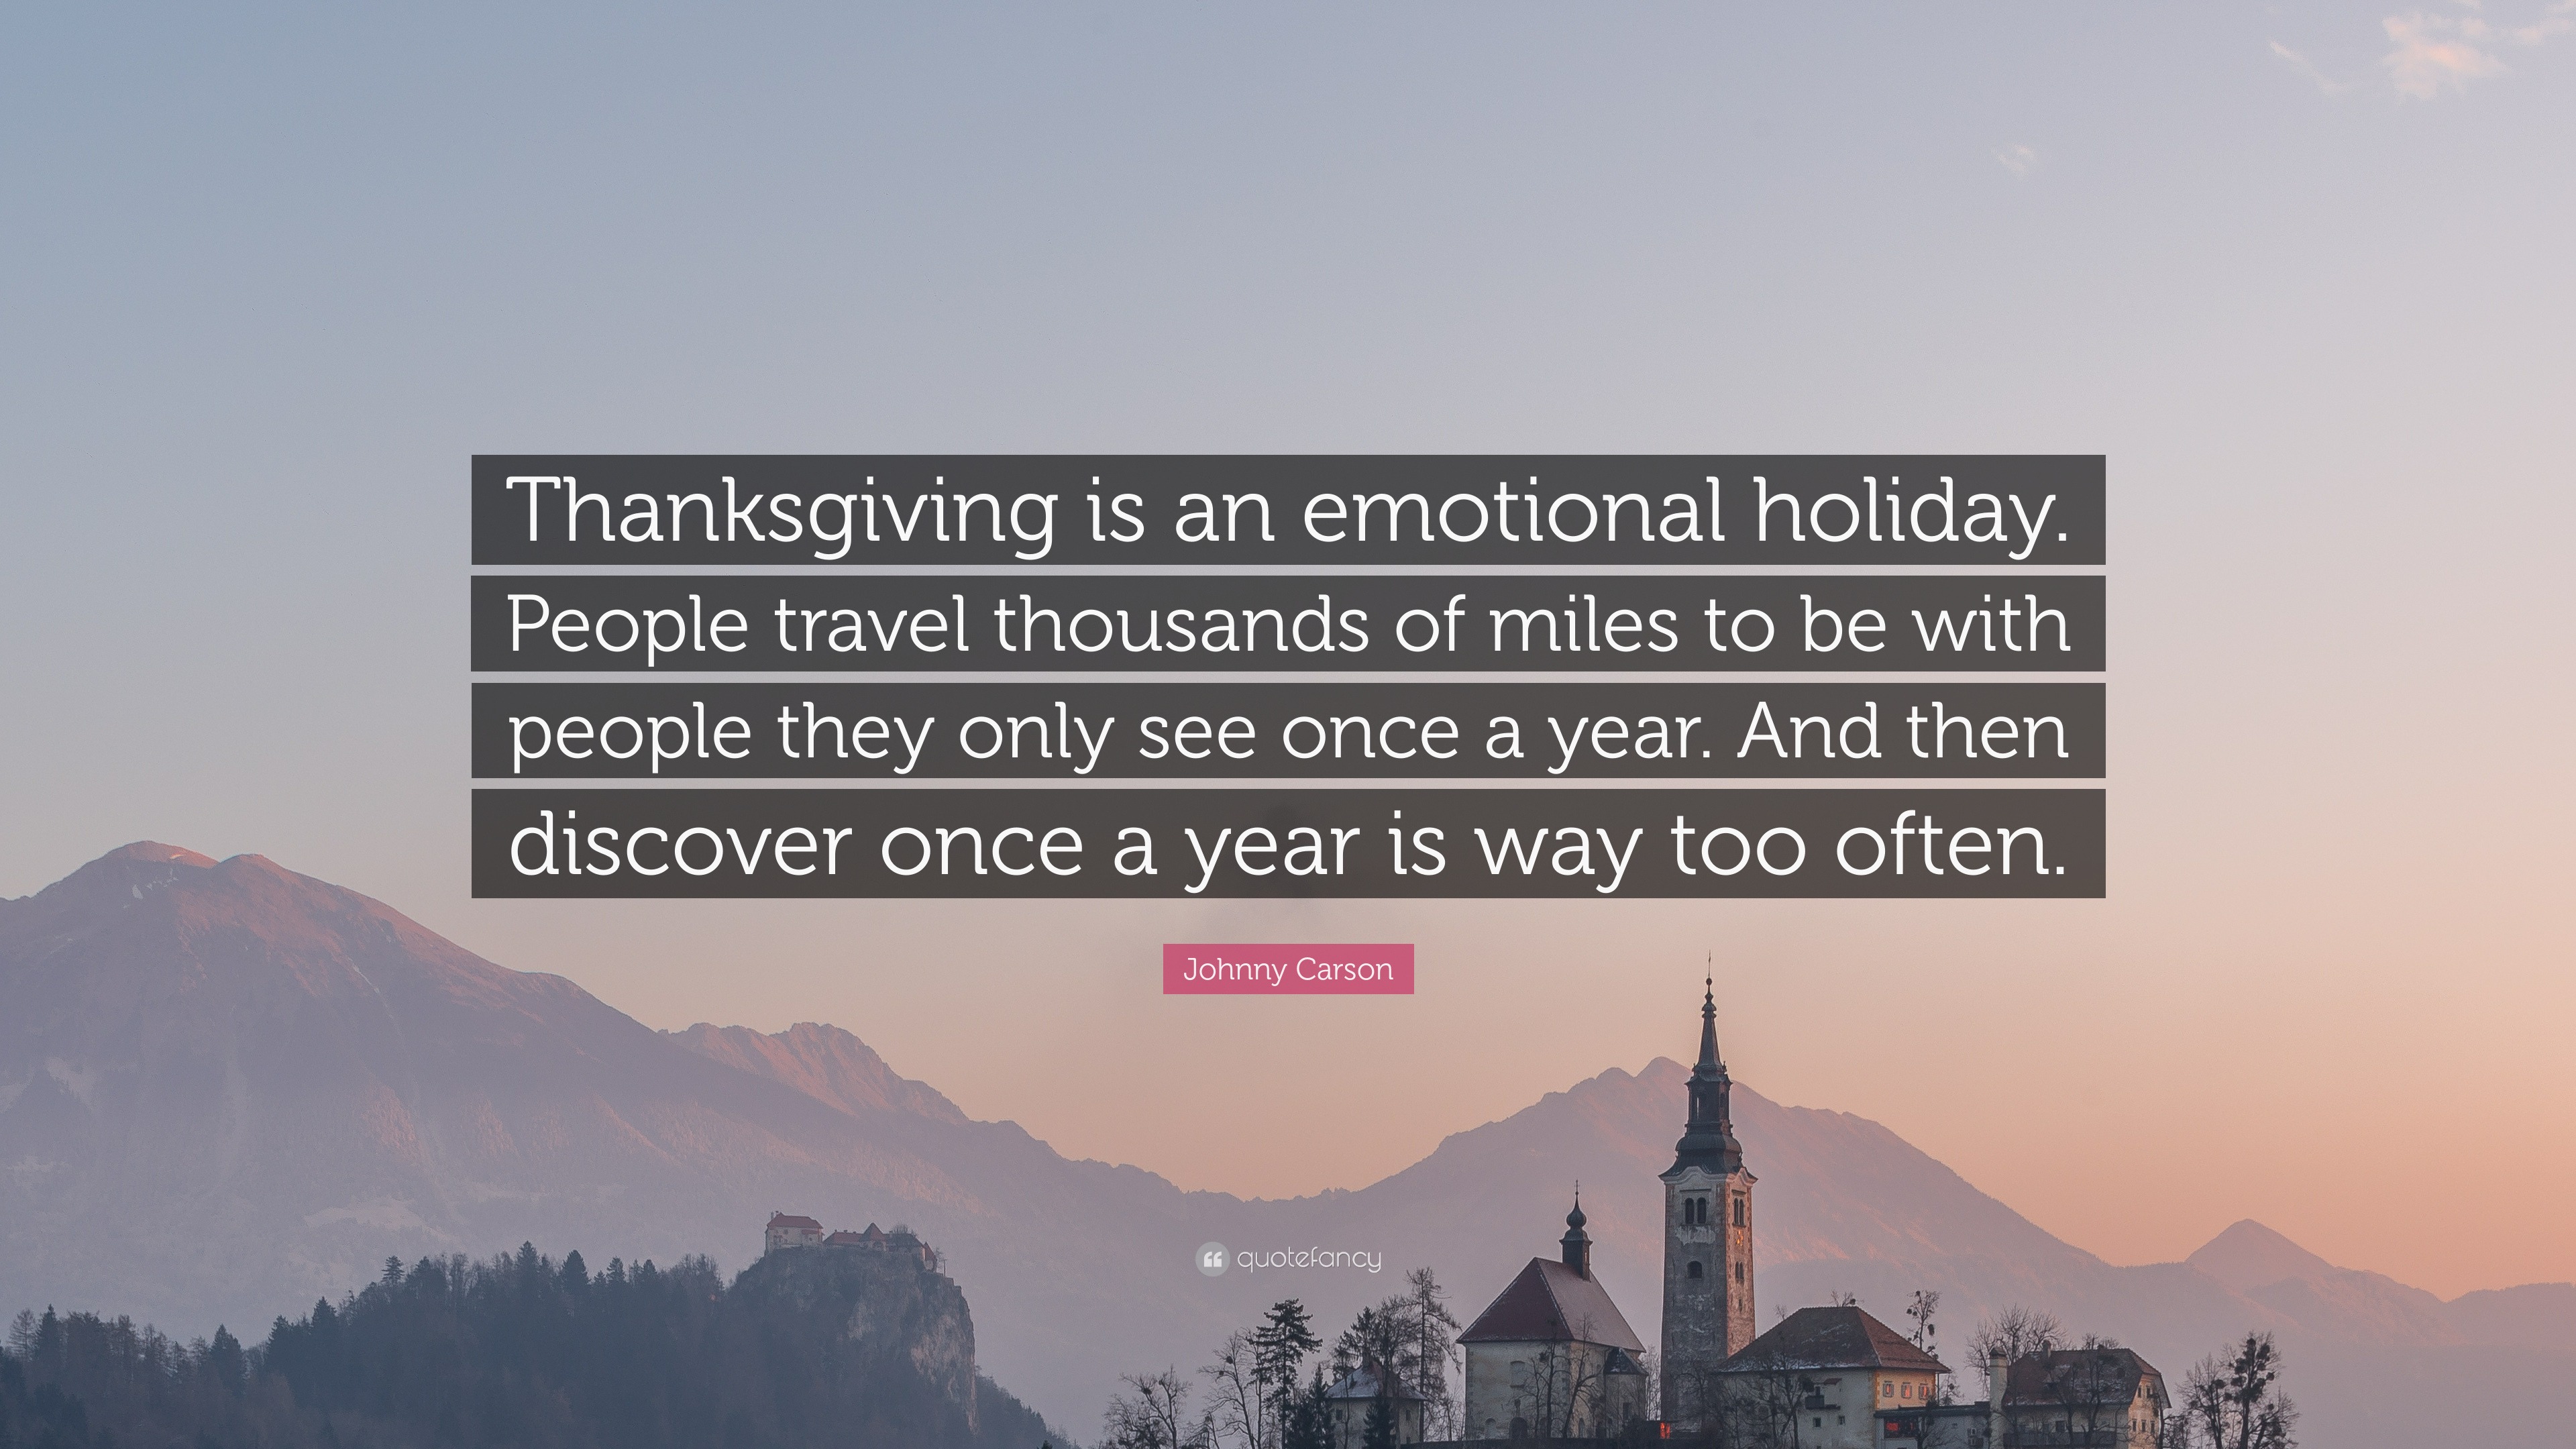 Johnny Carson Quote “Thanksgiving is an emotional holiday